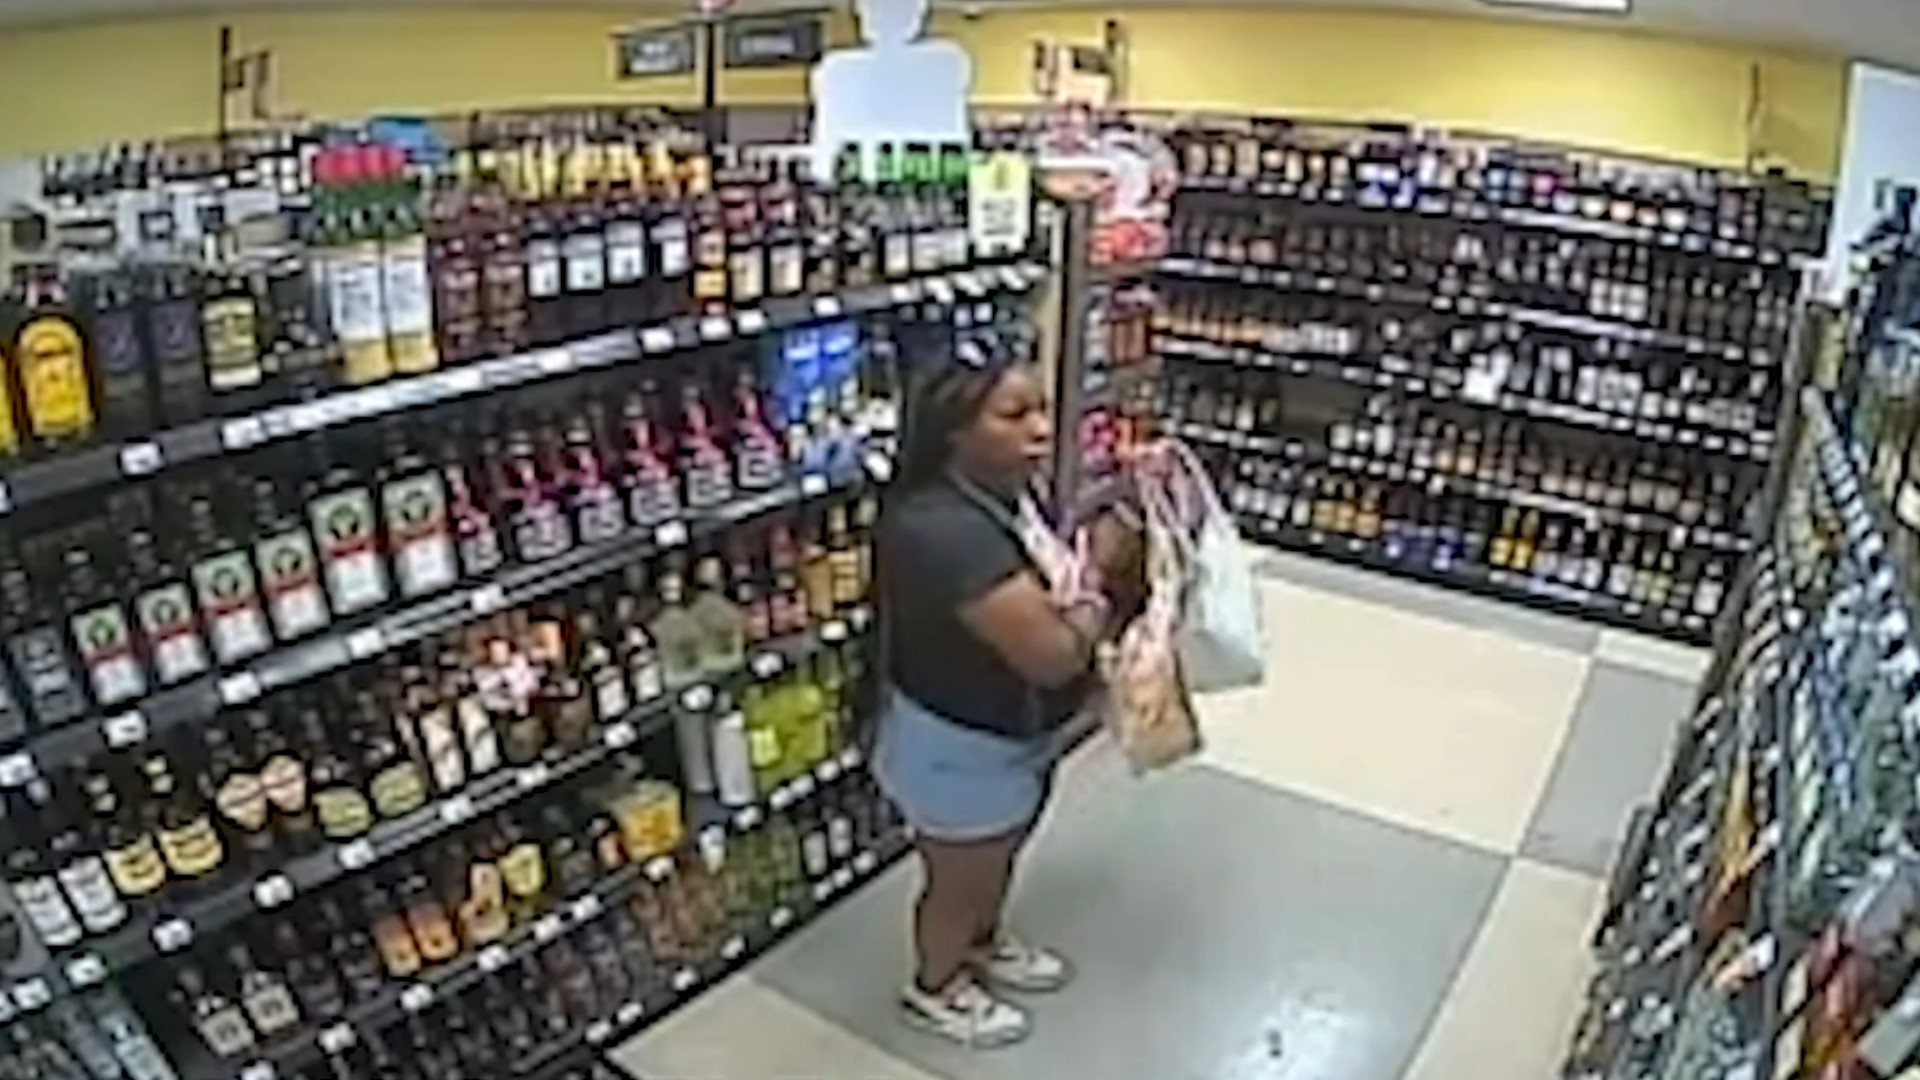 Video provided by the Blendon Township Police Department shows Ta'kiya Young allegedly stealing bottles of alcohol minutes before being fatally shot by police.